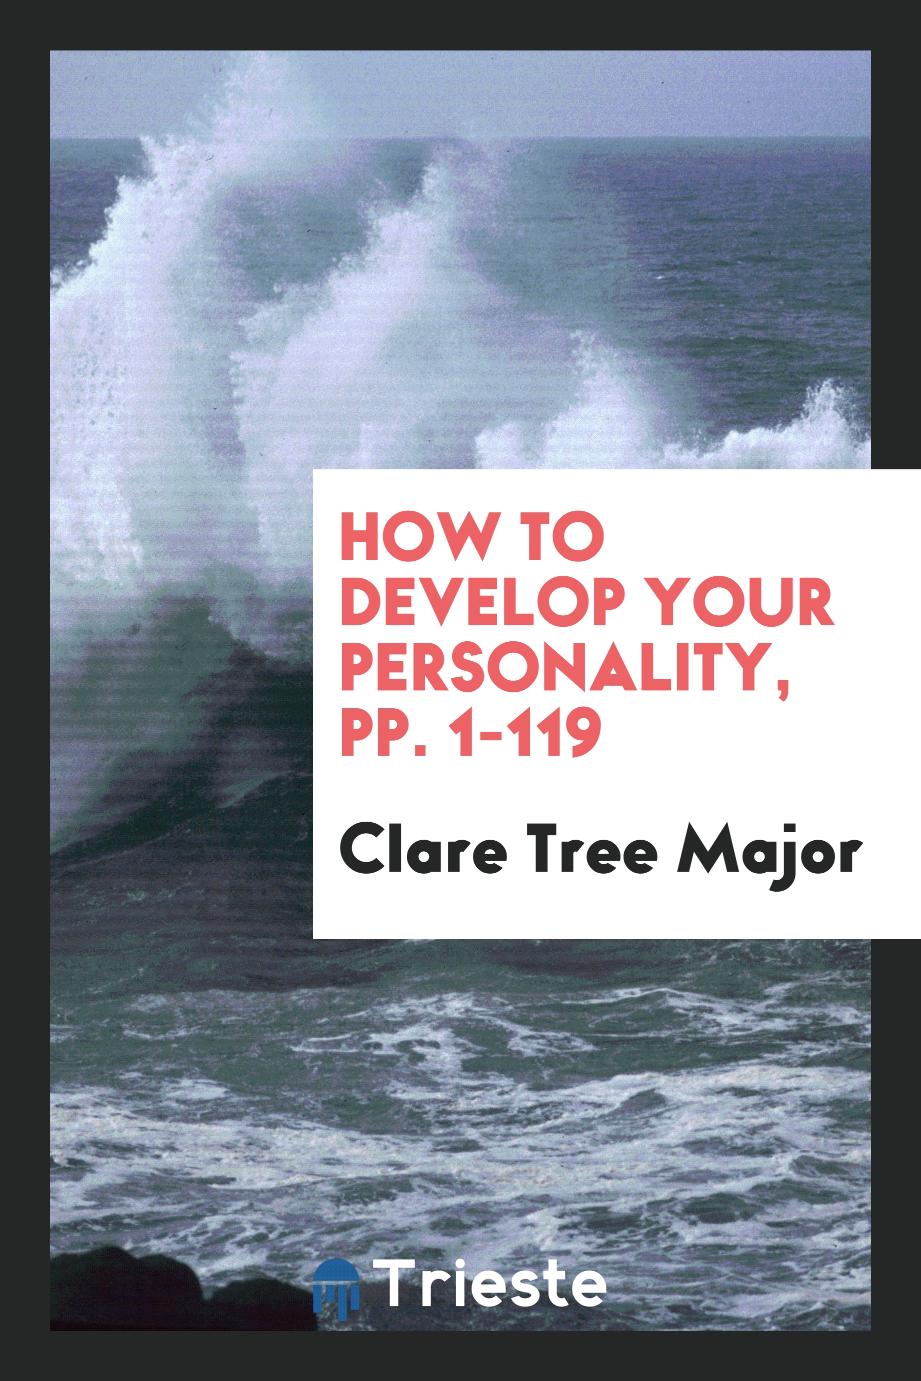 How to Develop Your Personality, pp. 1-119